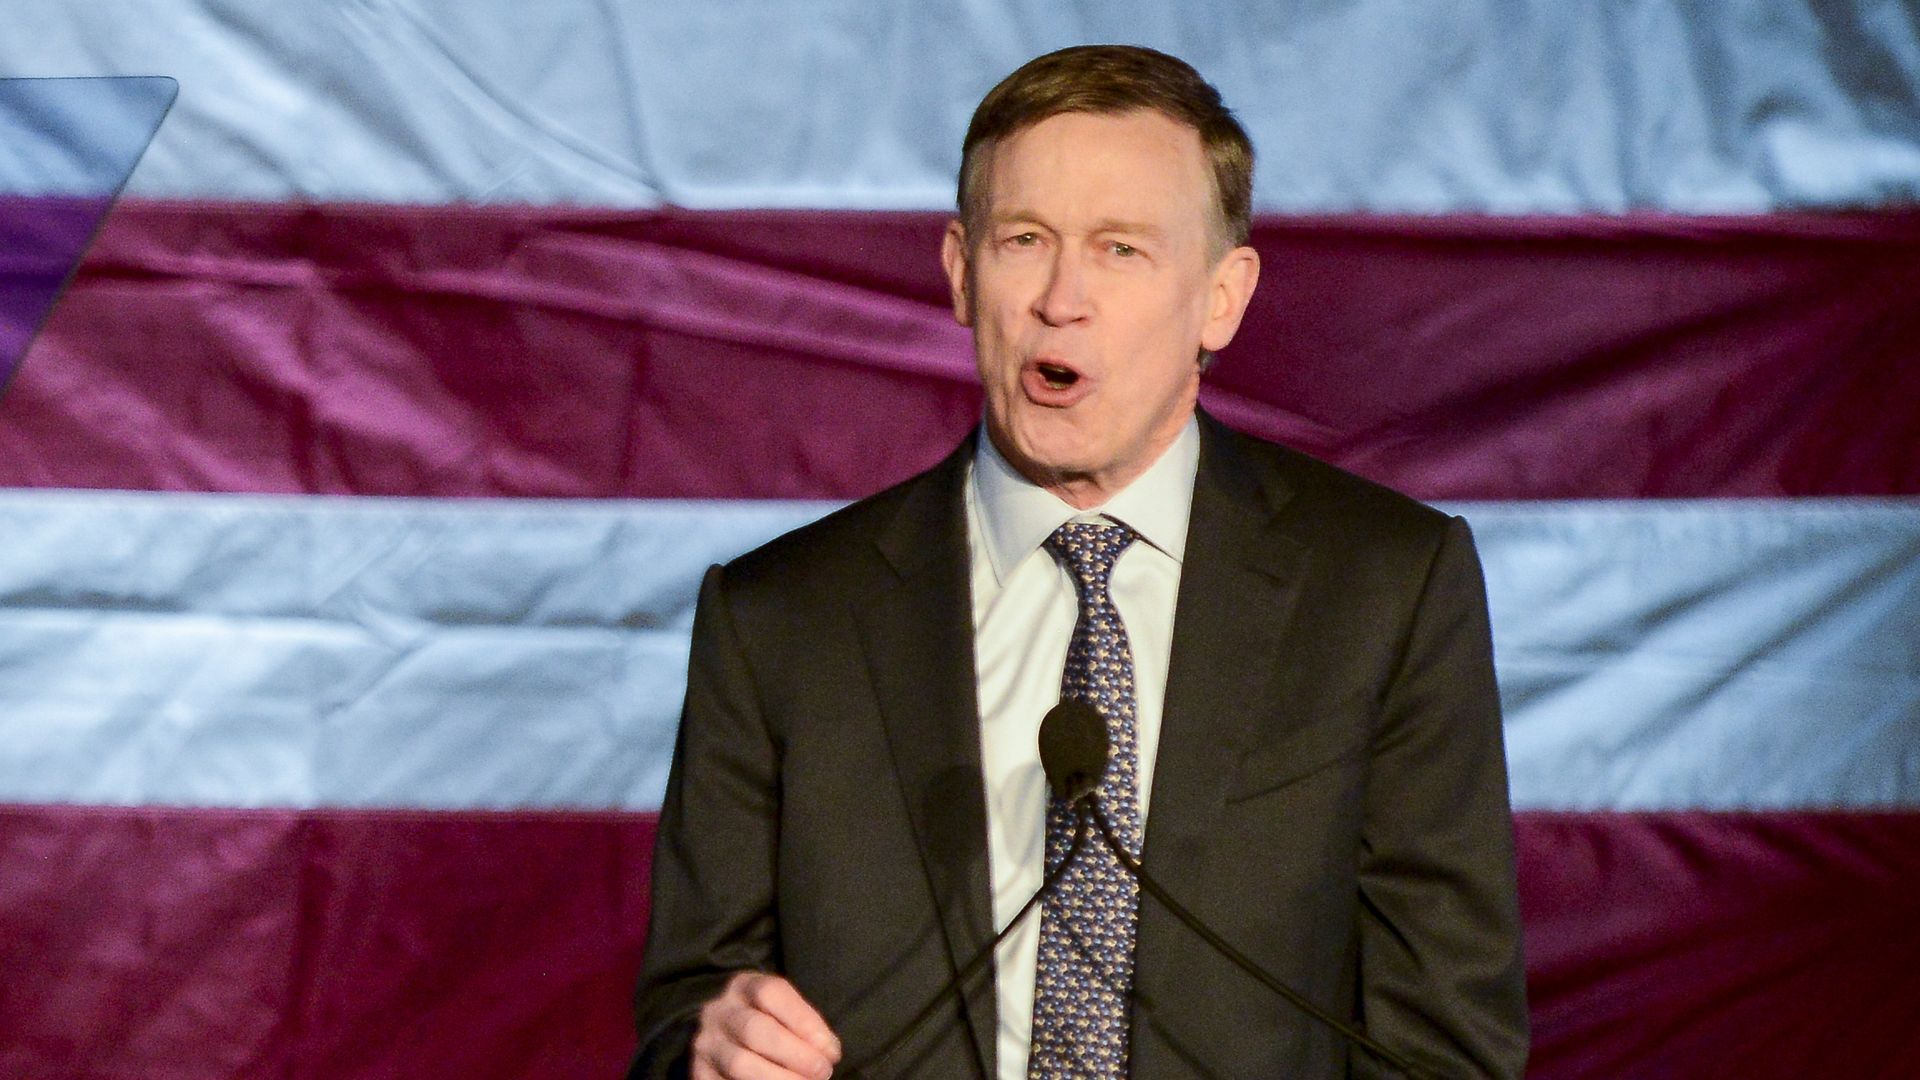 Former Colorado Gov. John Hickenlooper addressed  global terrorism and the rise of white nationalism Wednesday.